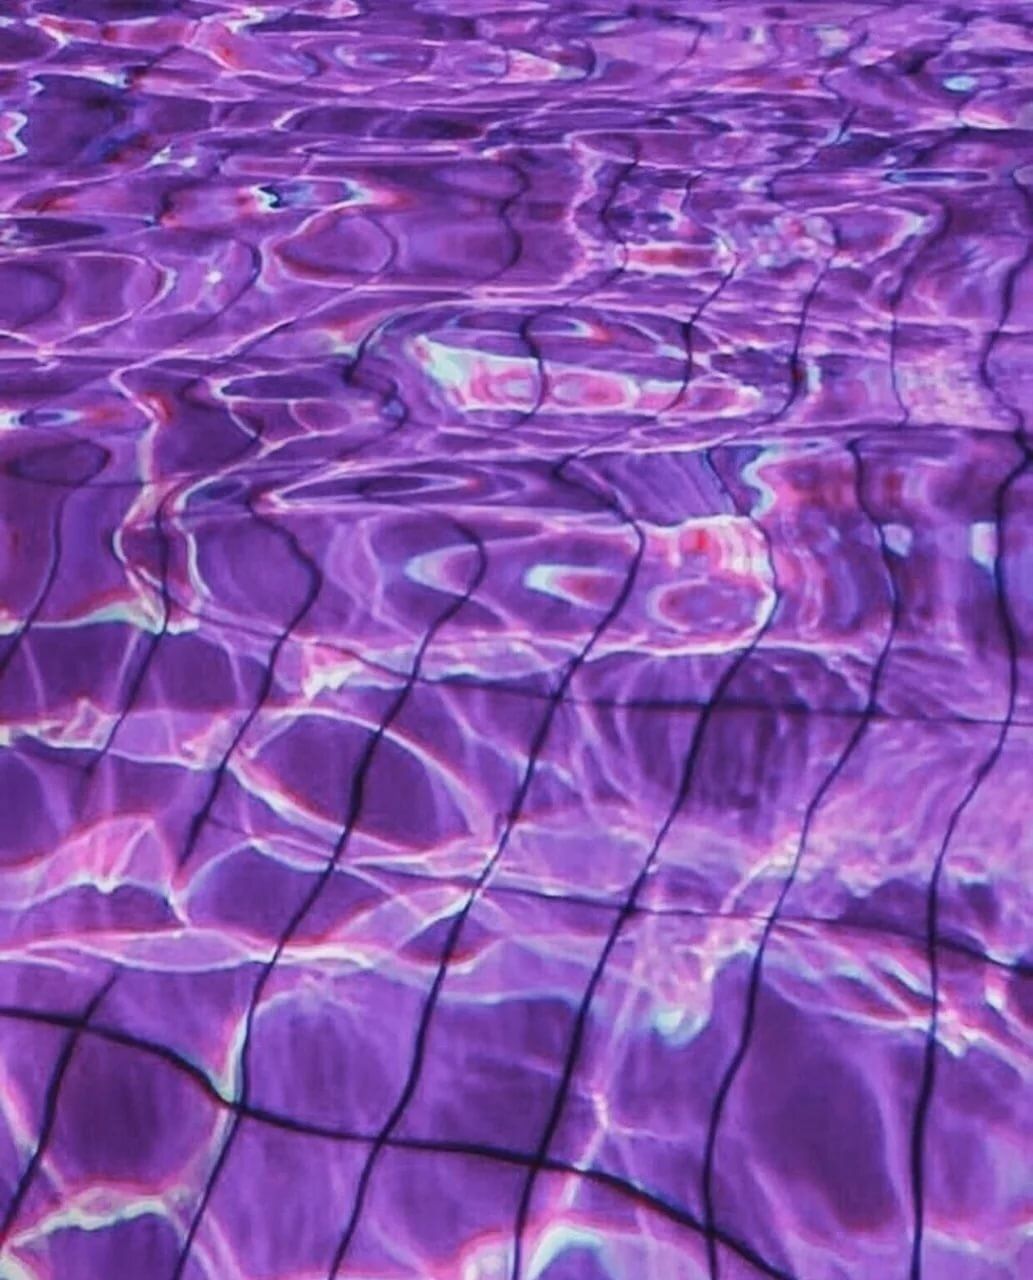 The water is purple and has ripples in it. - Water